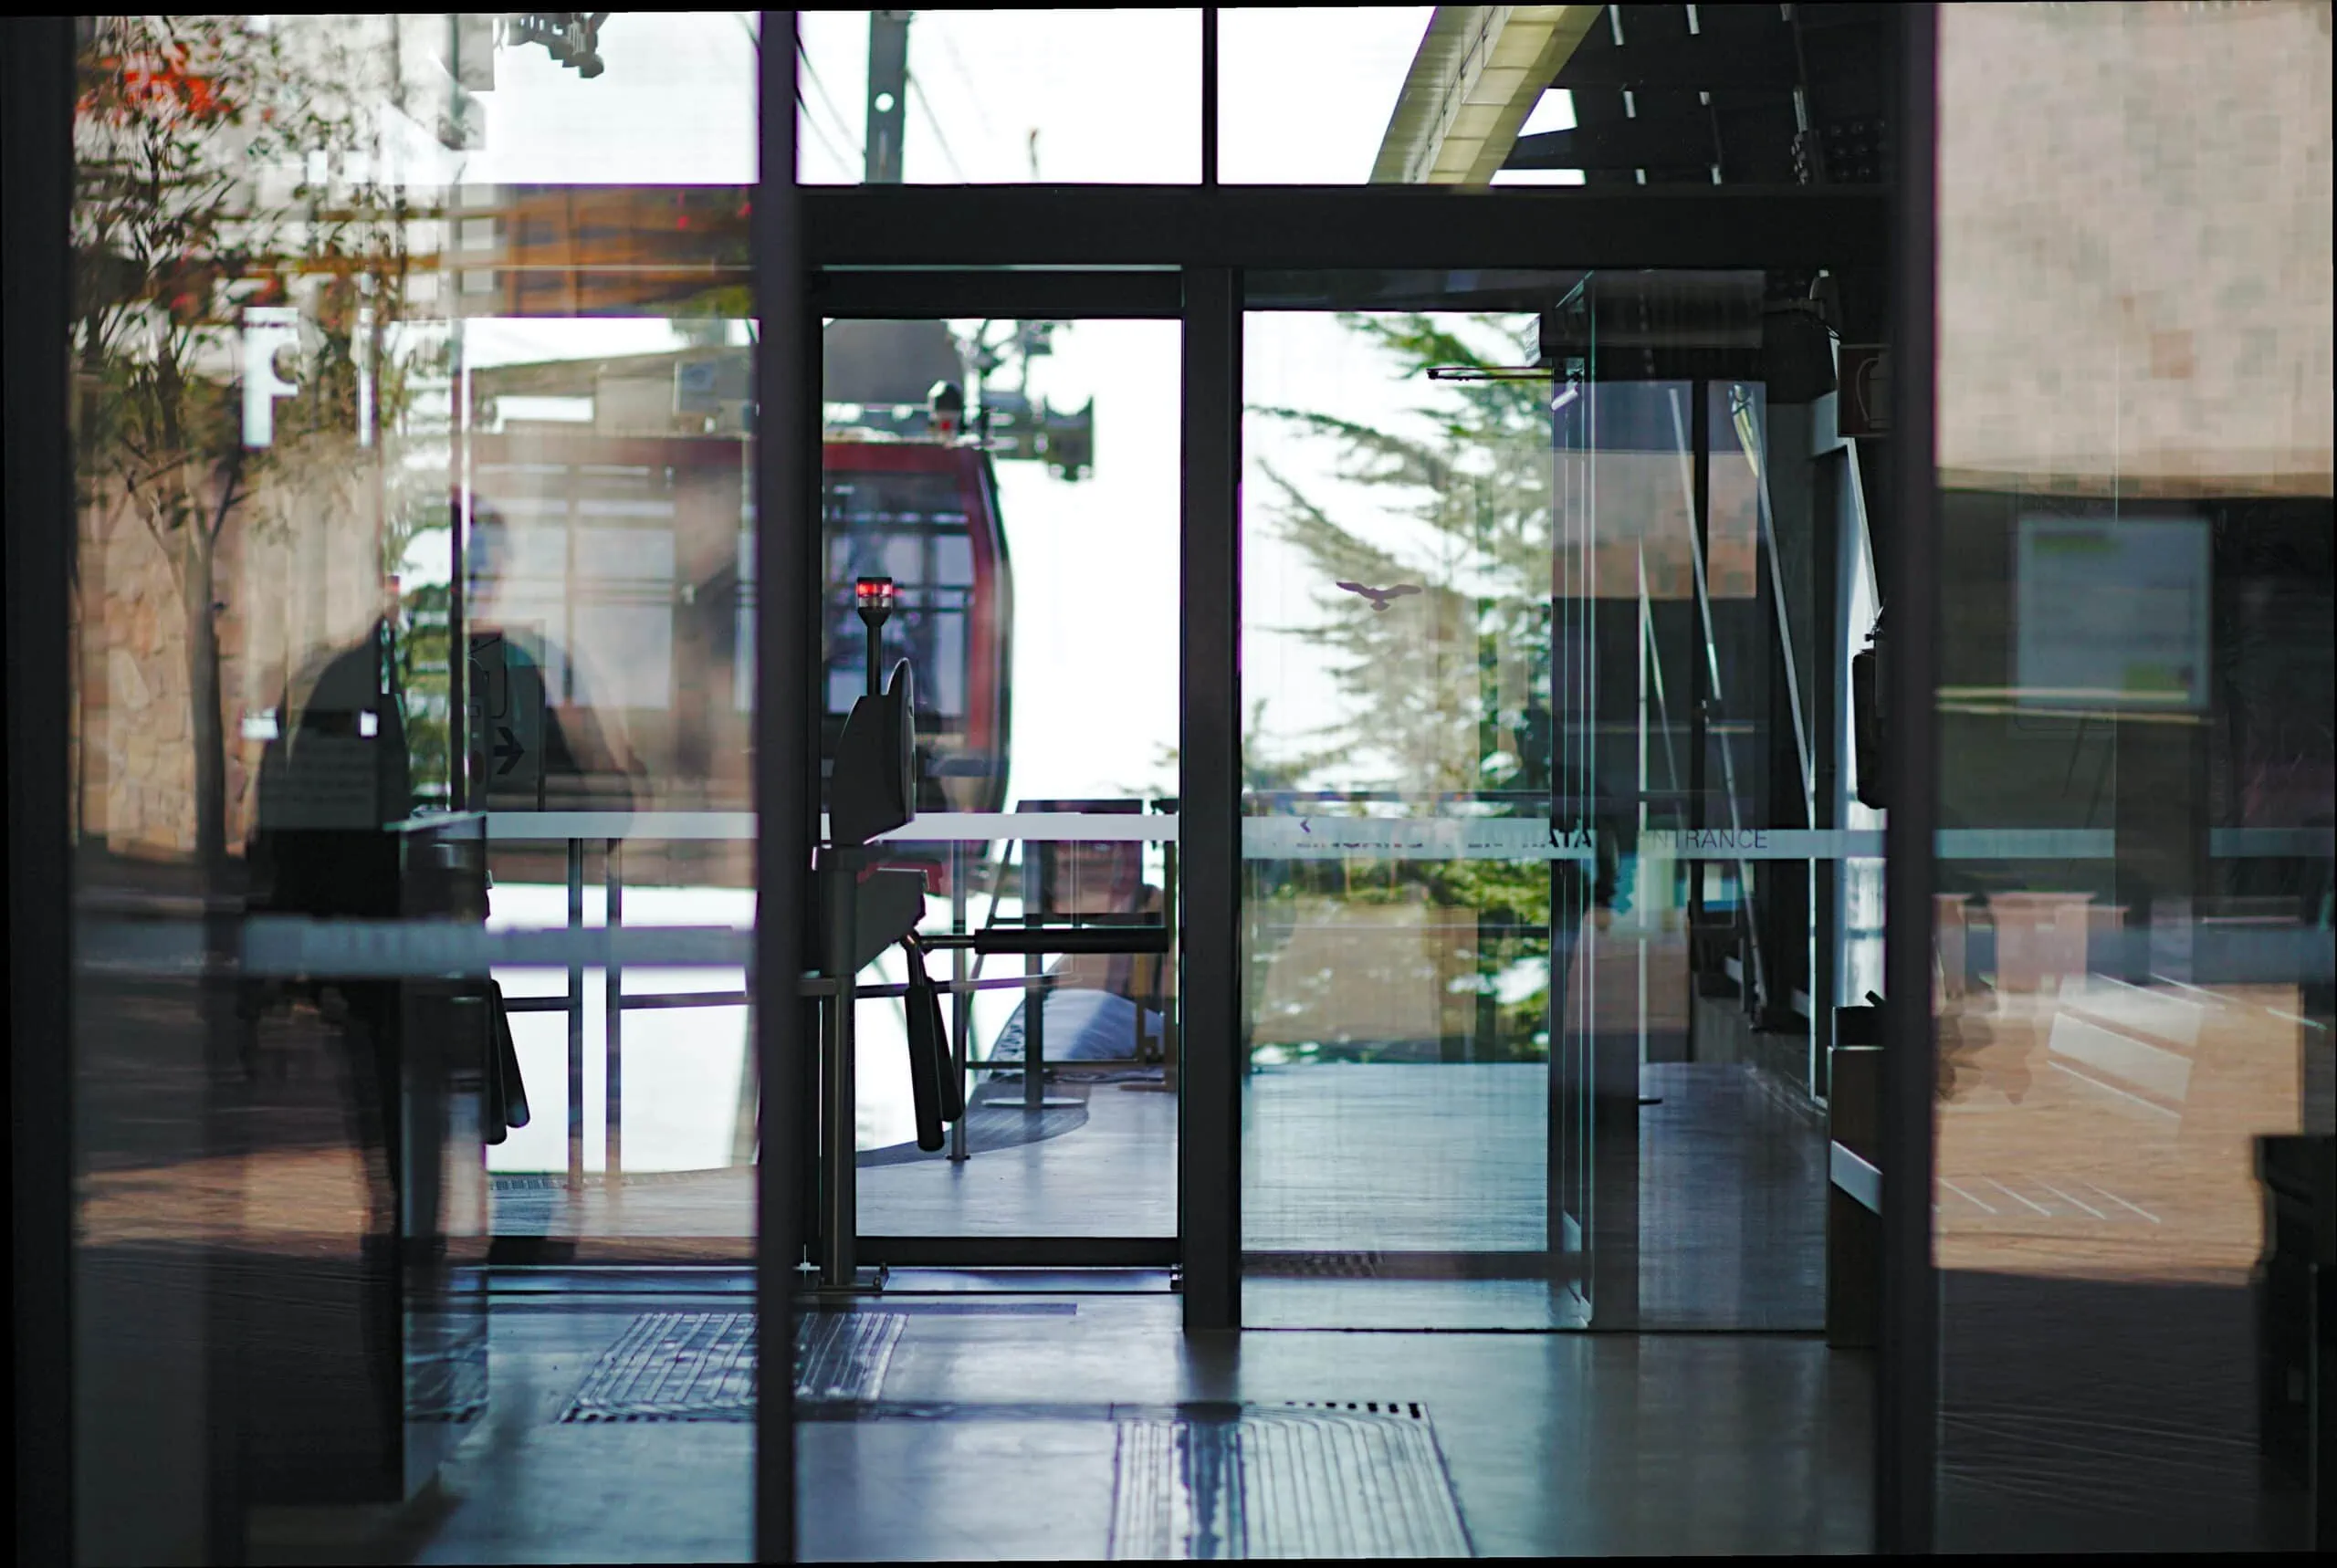 Bank glass door entrance secured with door access control system